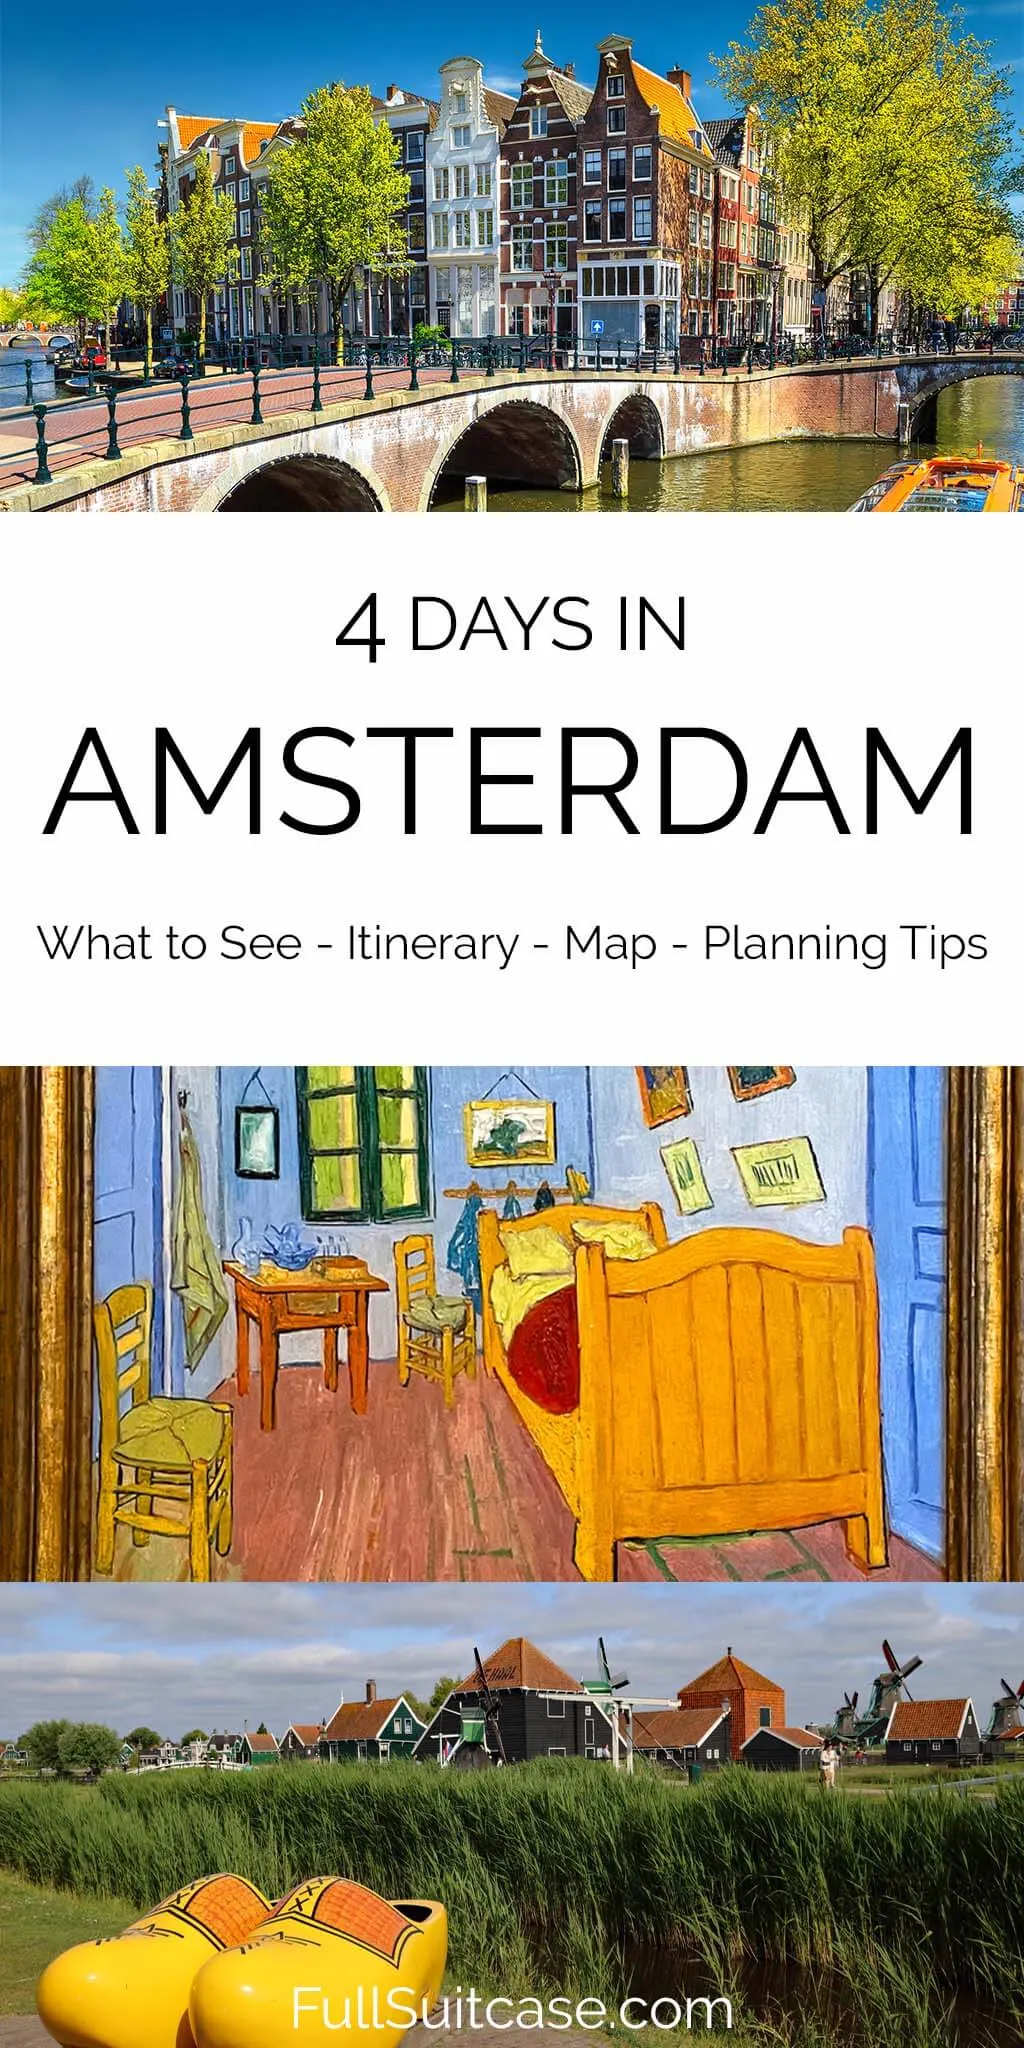 Four days in Amsterdam itinerary